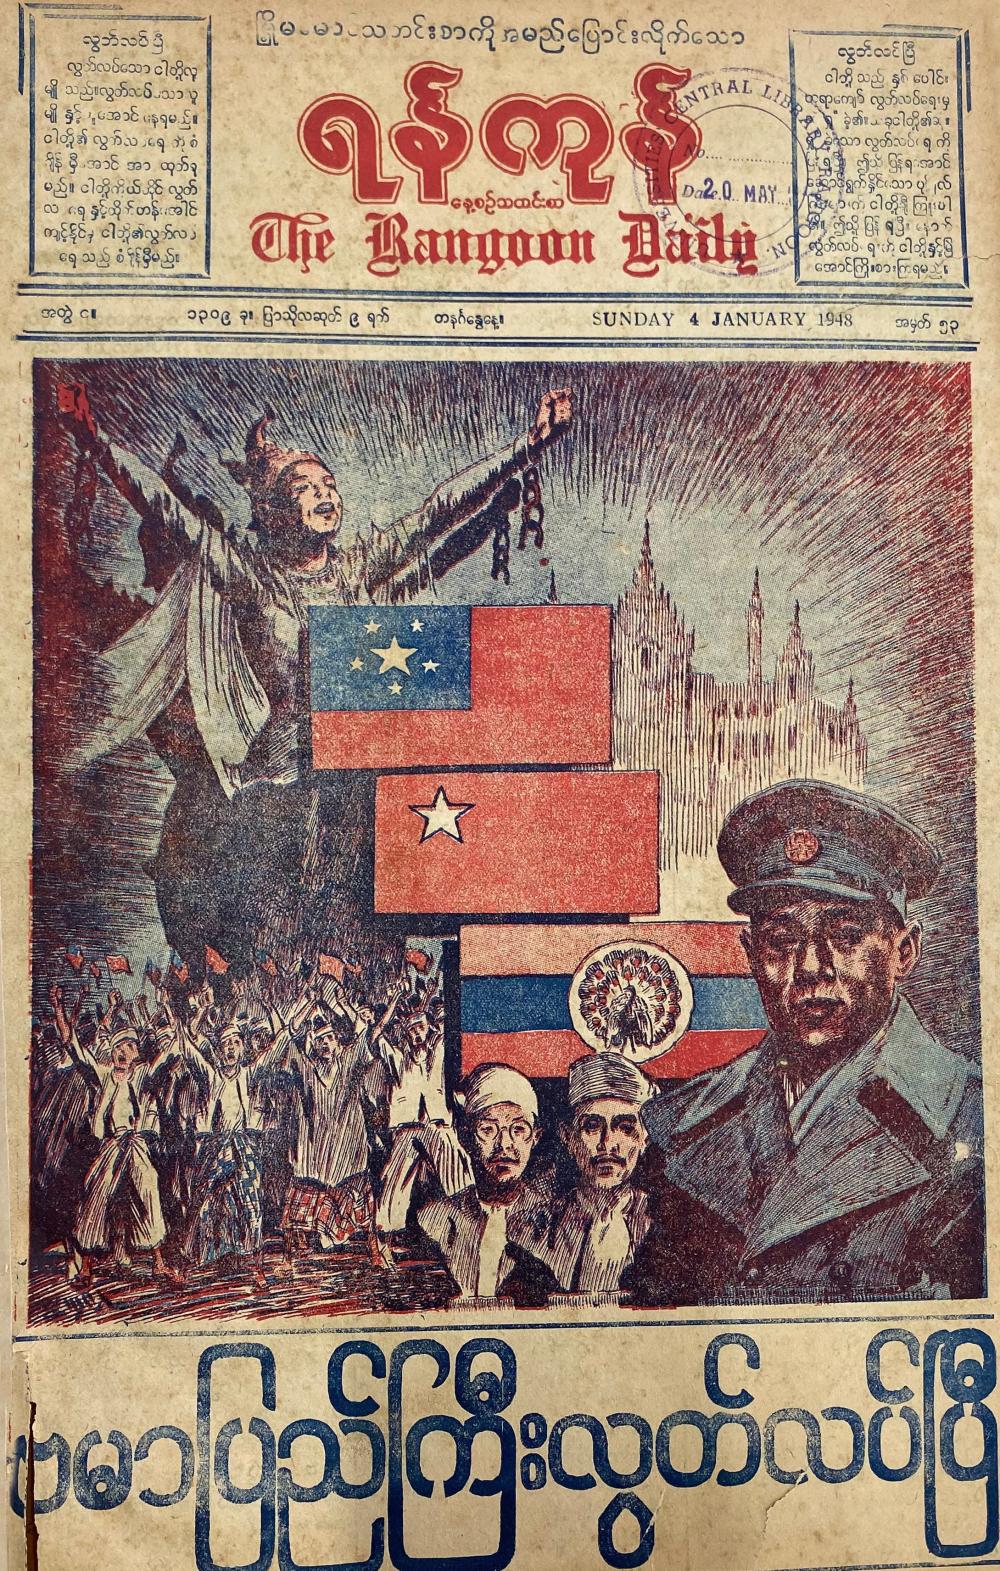  A cartoon published in The Rangoon Daily on January 4, 1948—the day the nation became an independent republic. 